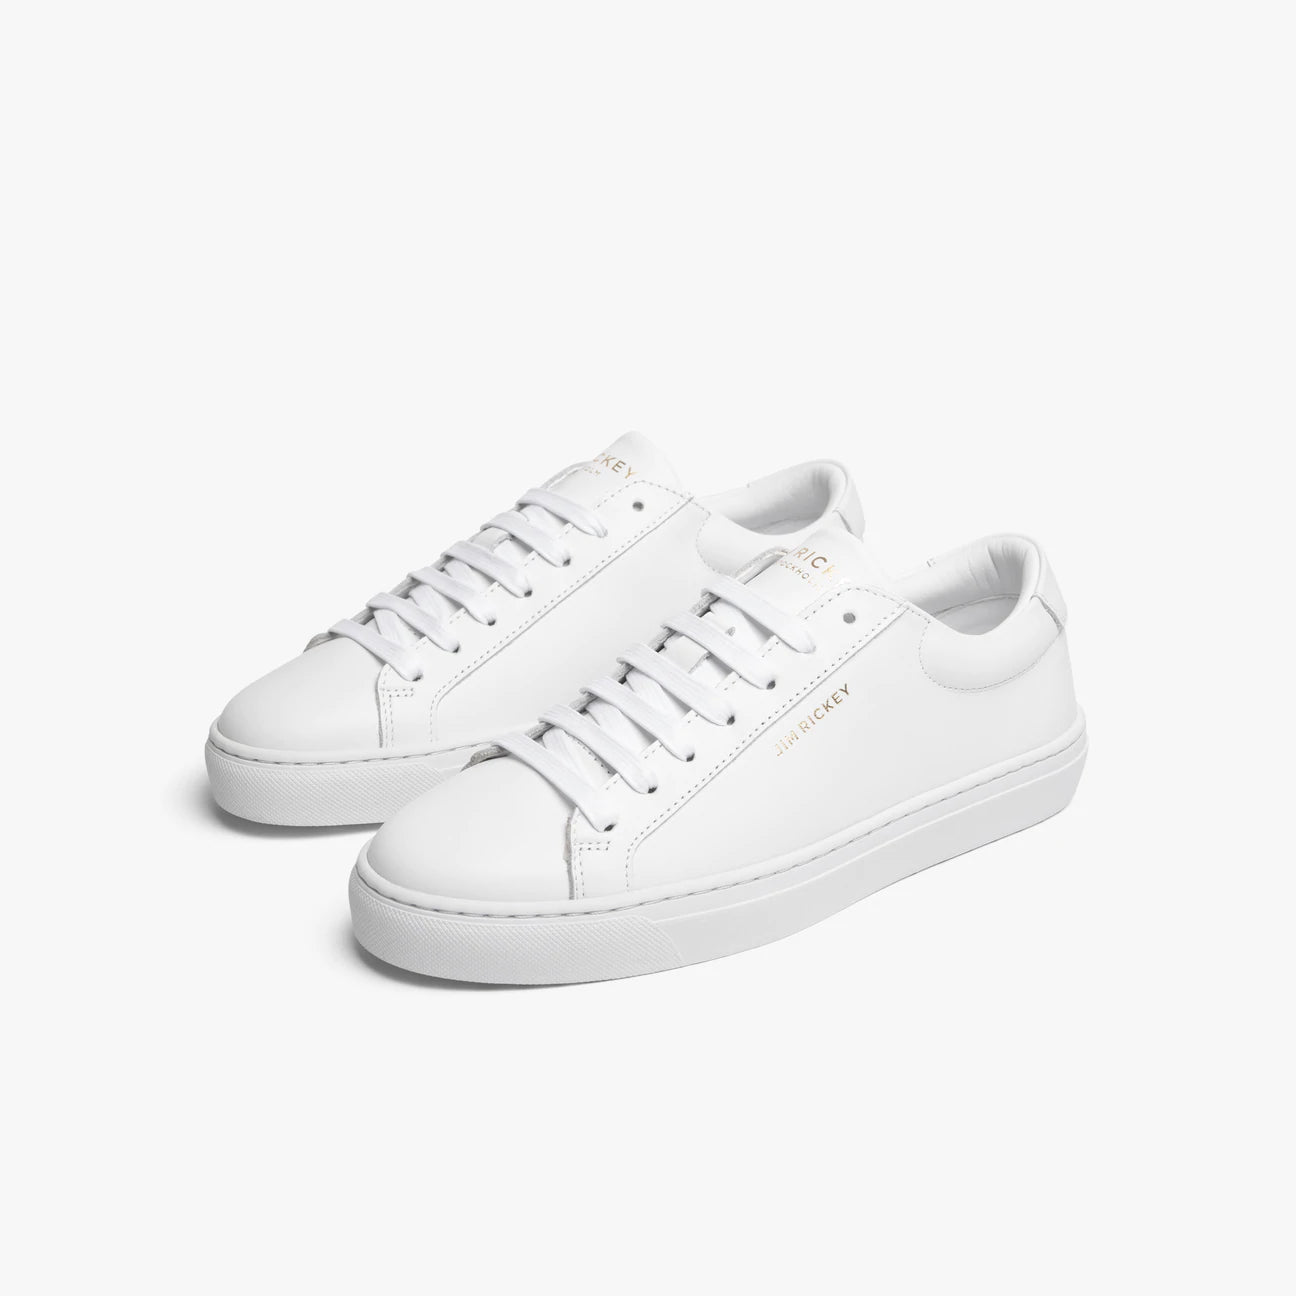 Spin leather sneakers (wht) – UNIKONCEPT